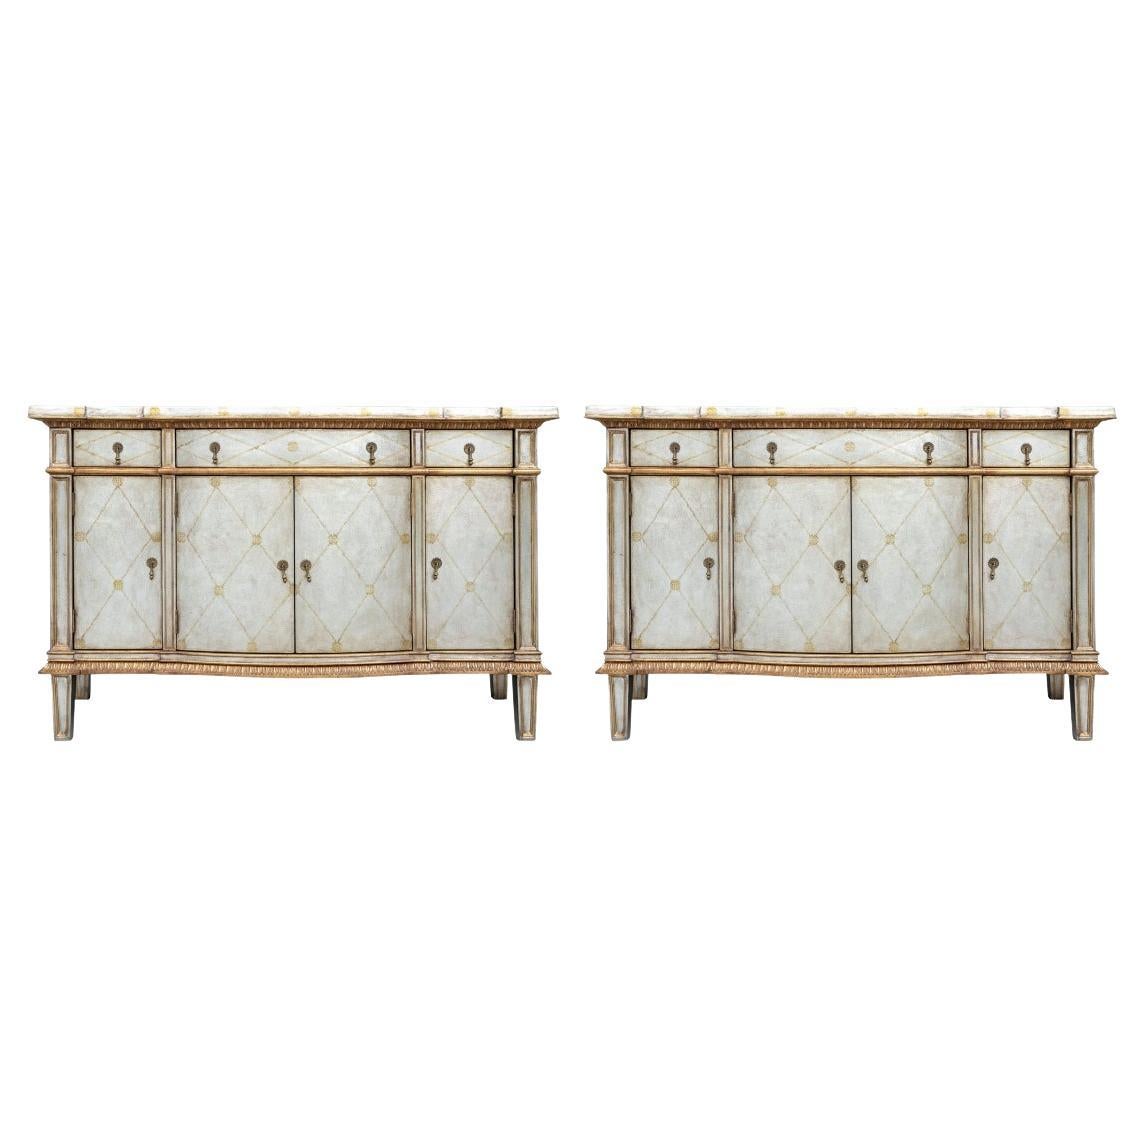 Extraordinary Pair of John-Richard Silvered Leather Credenzas